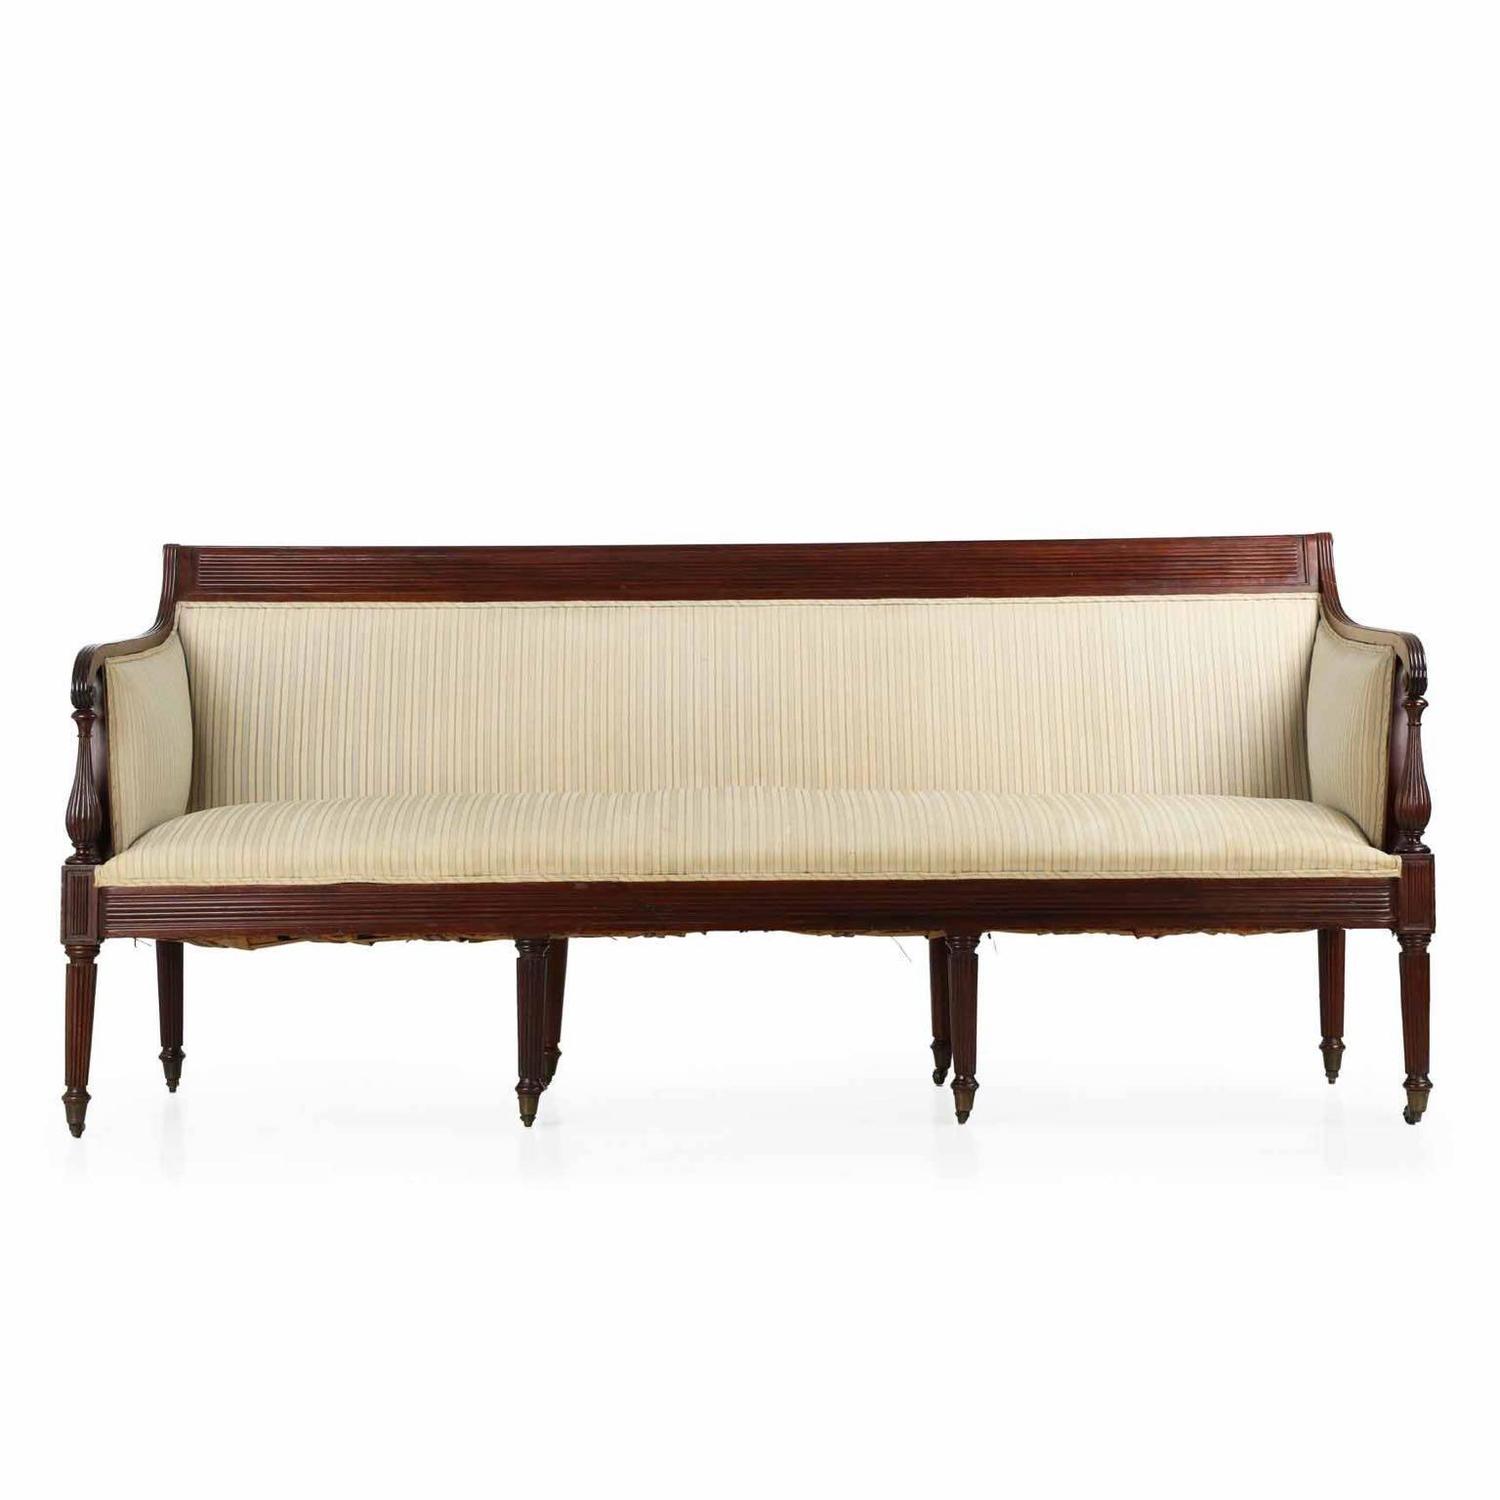 american classical reeded mahogany antique sofa settee, baltimore, circa  1820 at NBCYETH